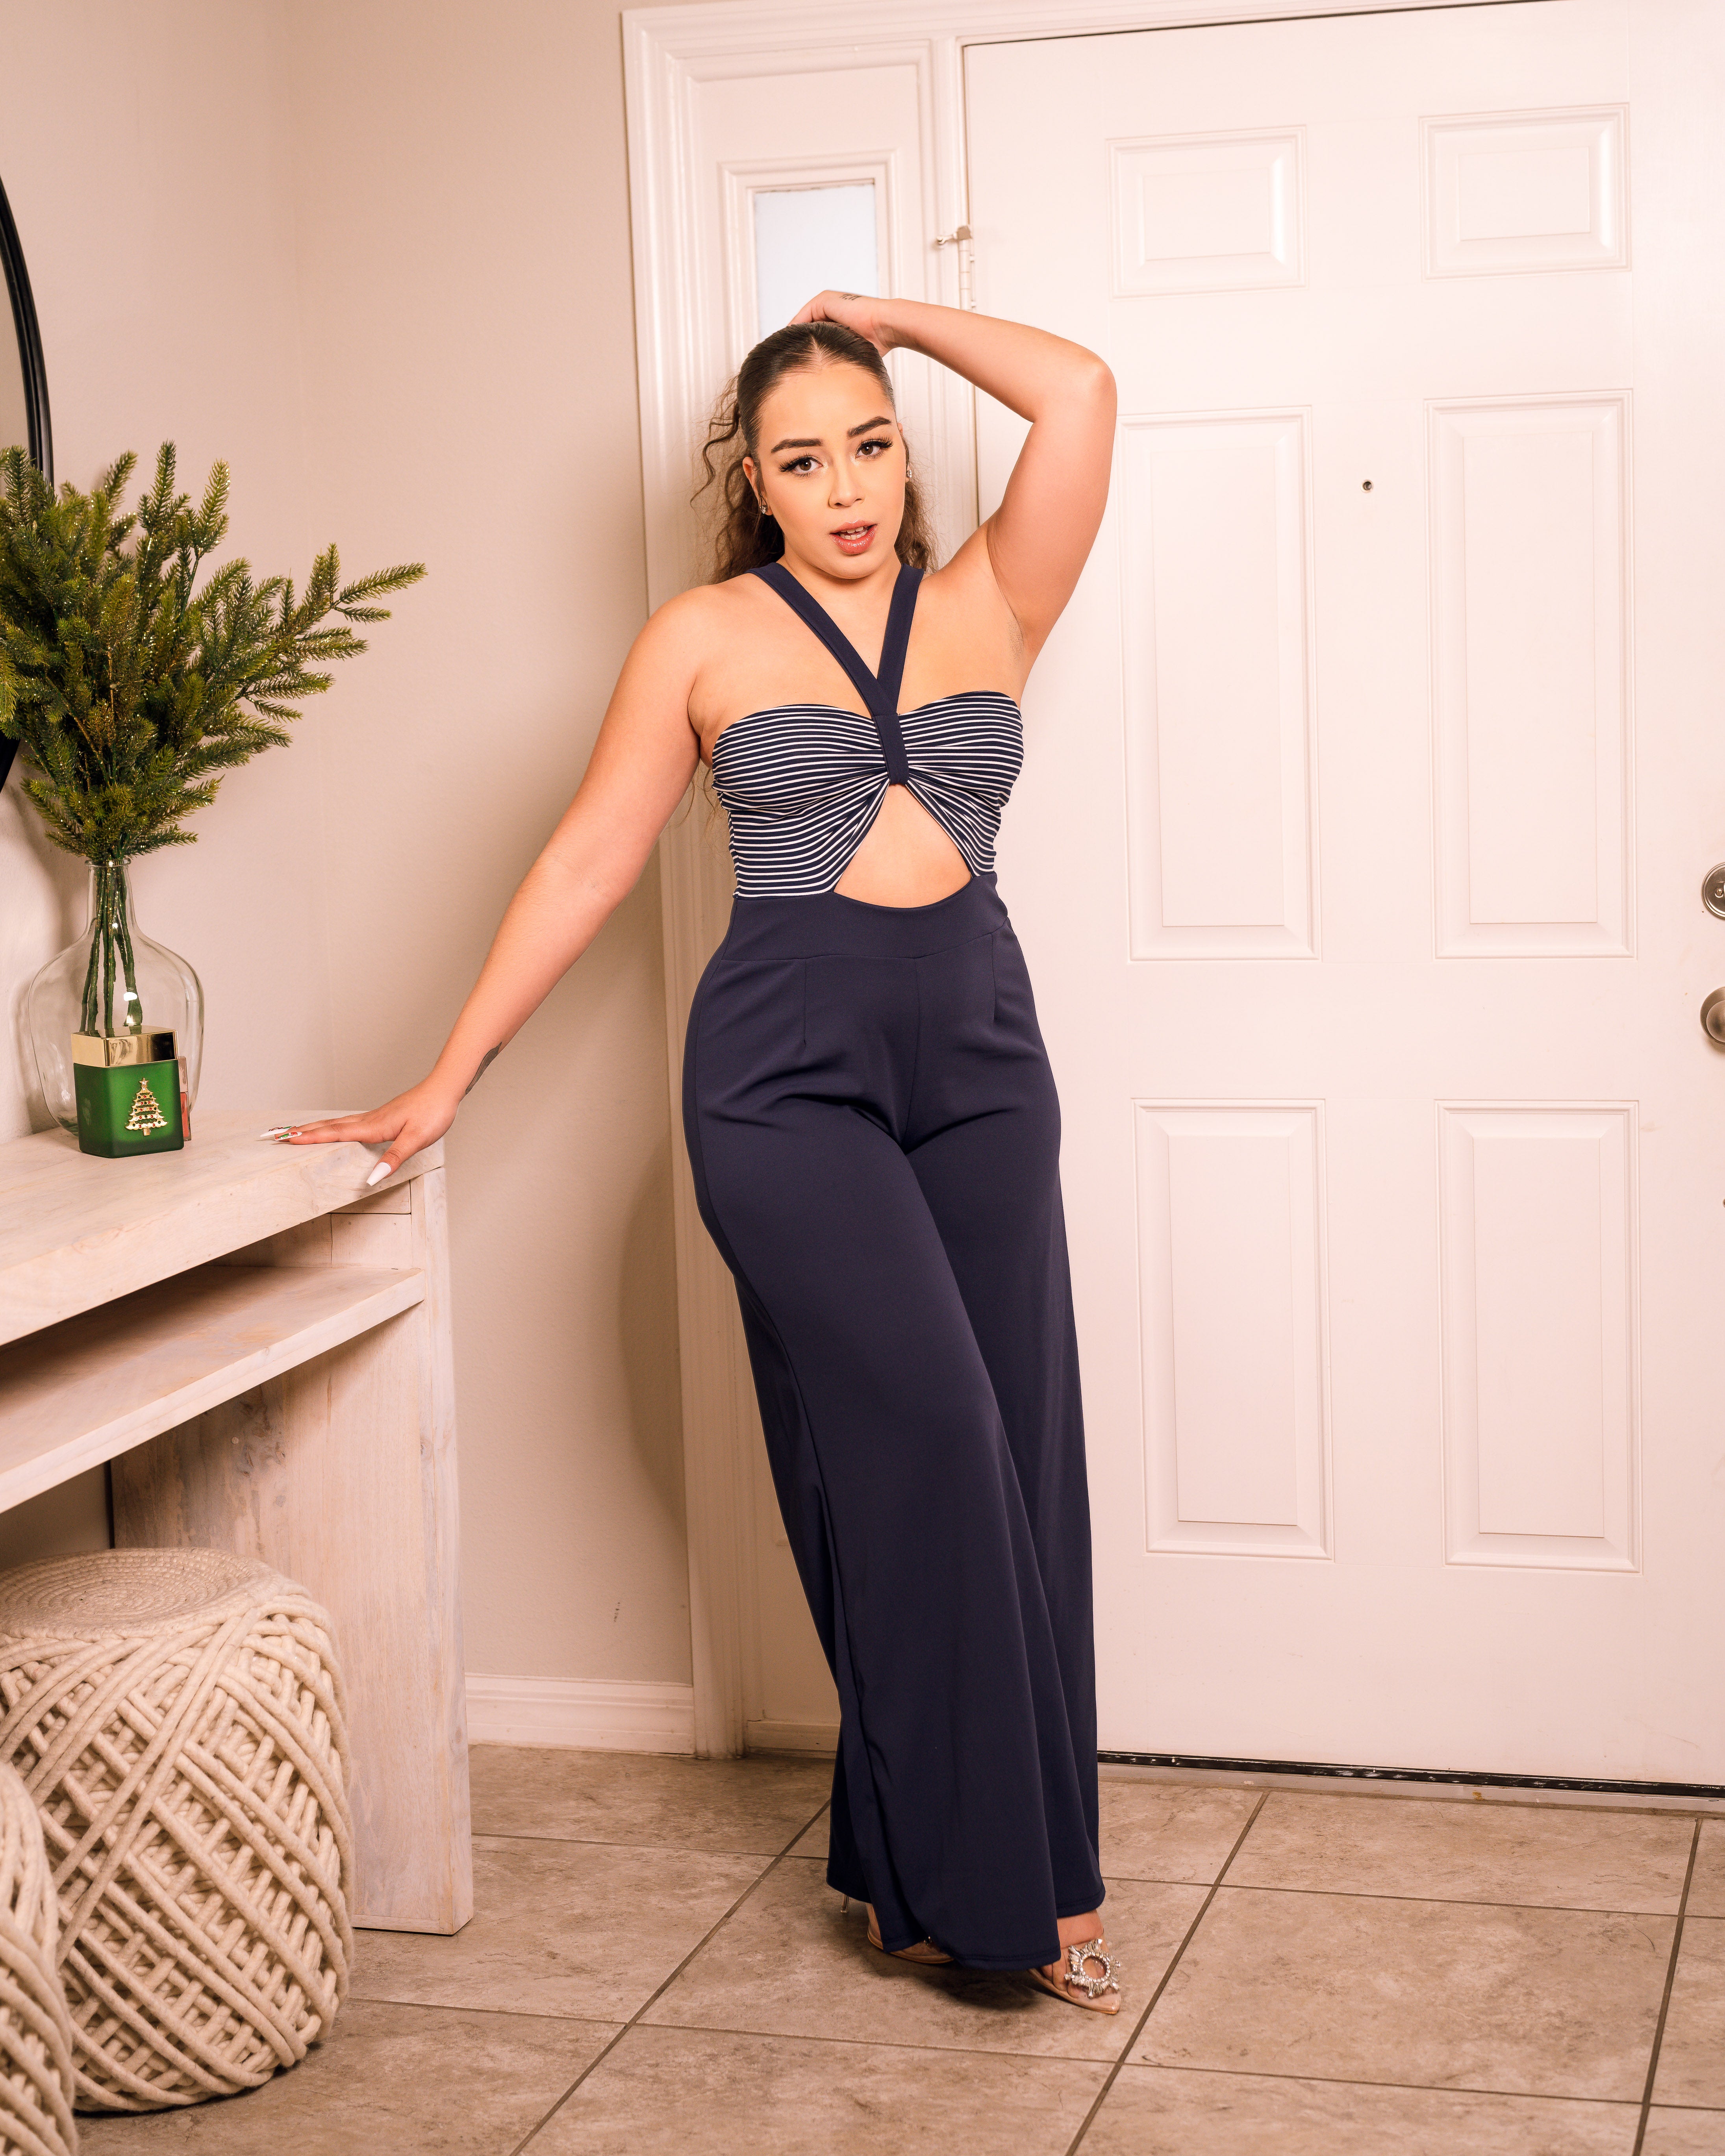 Ms Kiana contrasted jumpsuit